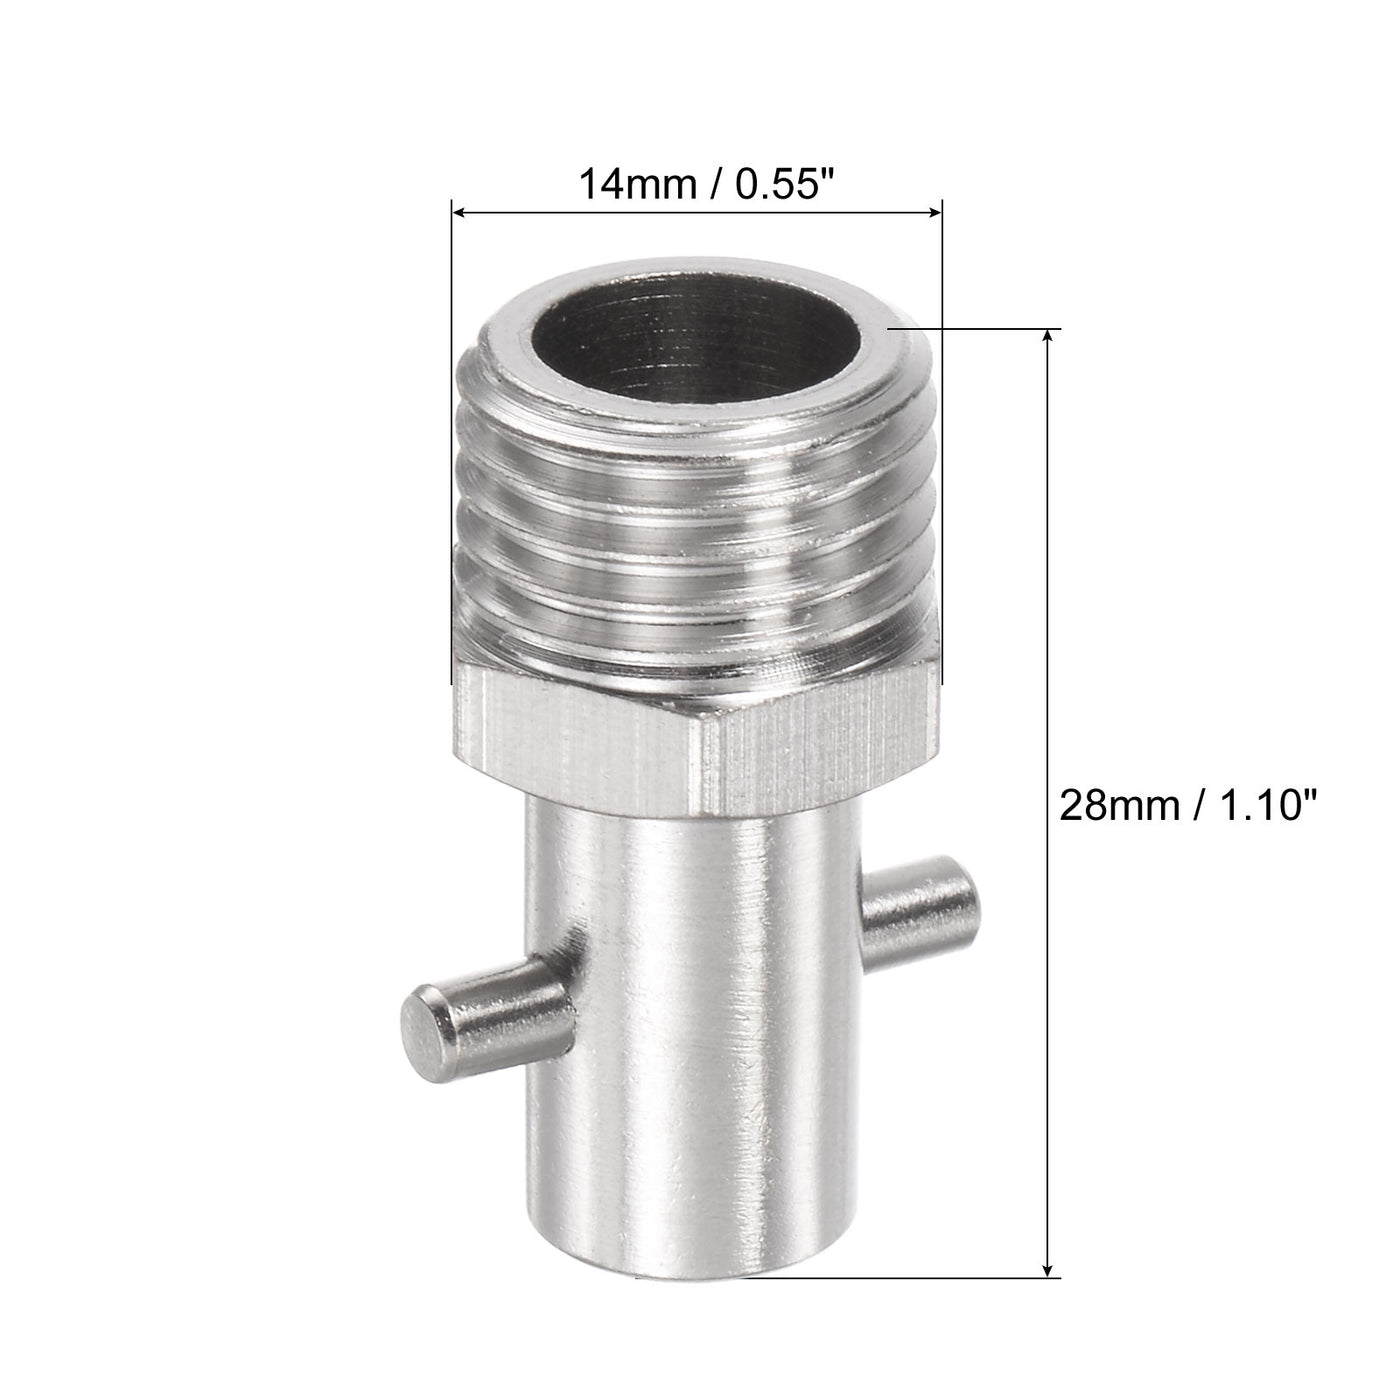 uxcell Uxcell Nickel-Plated Brass Straight Grease Fitting Accessories M14 x 1.5mm Thread